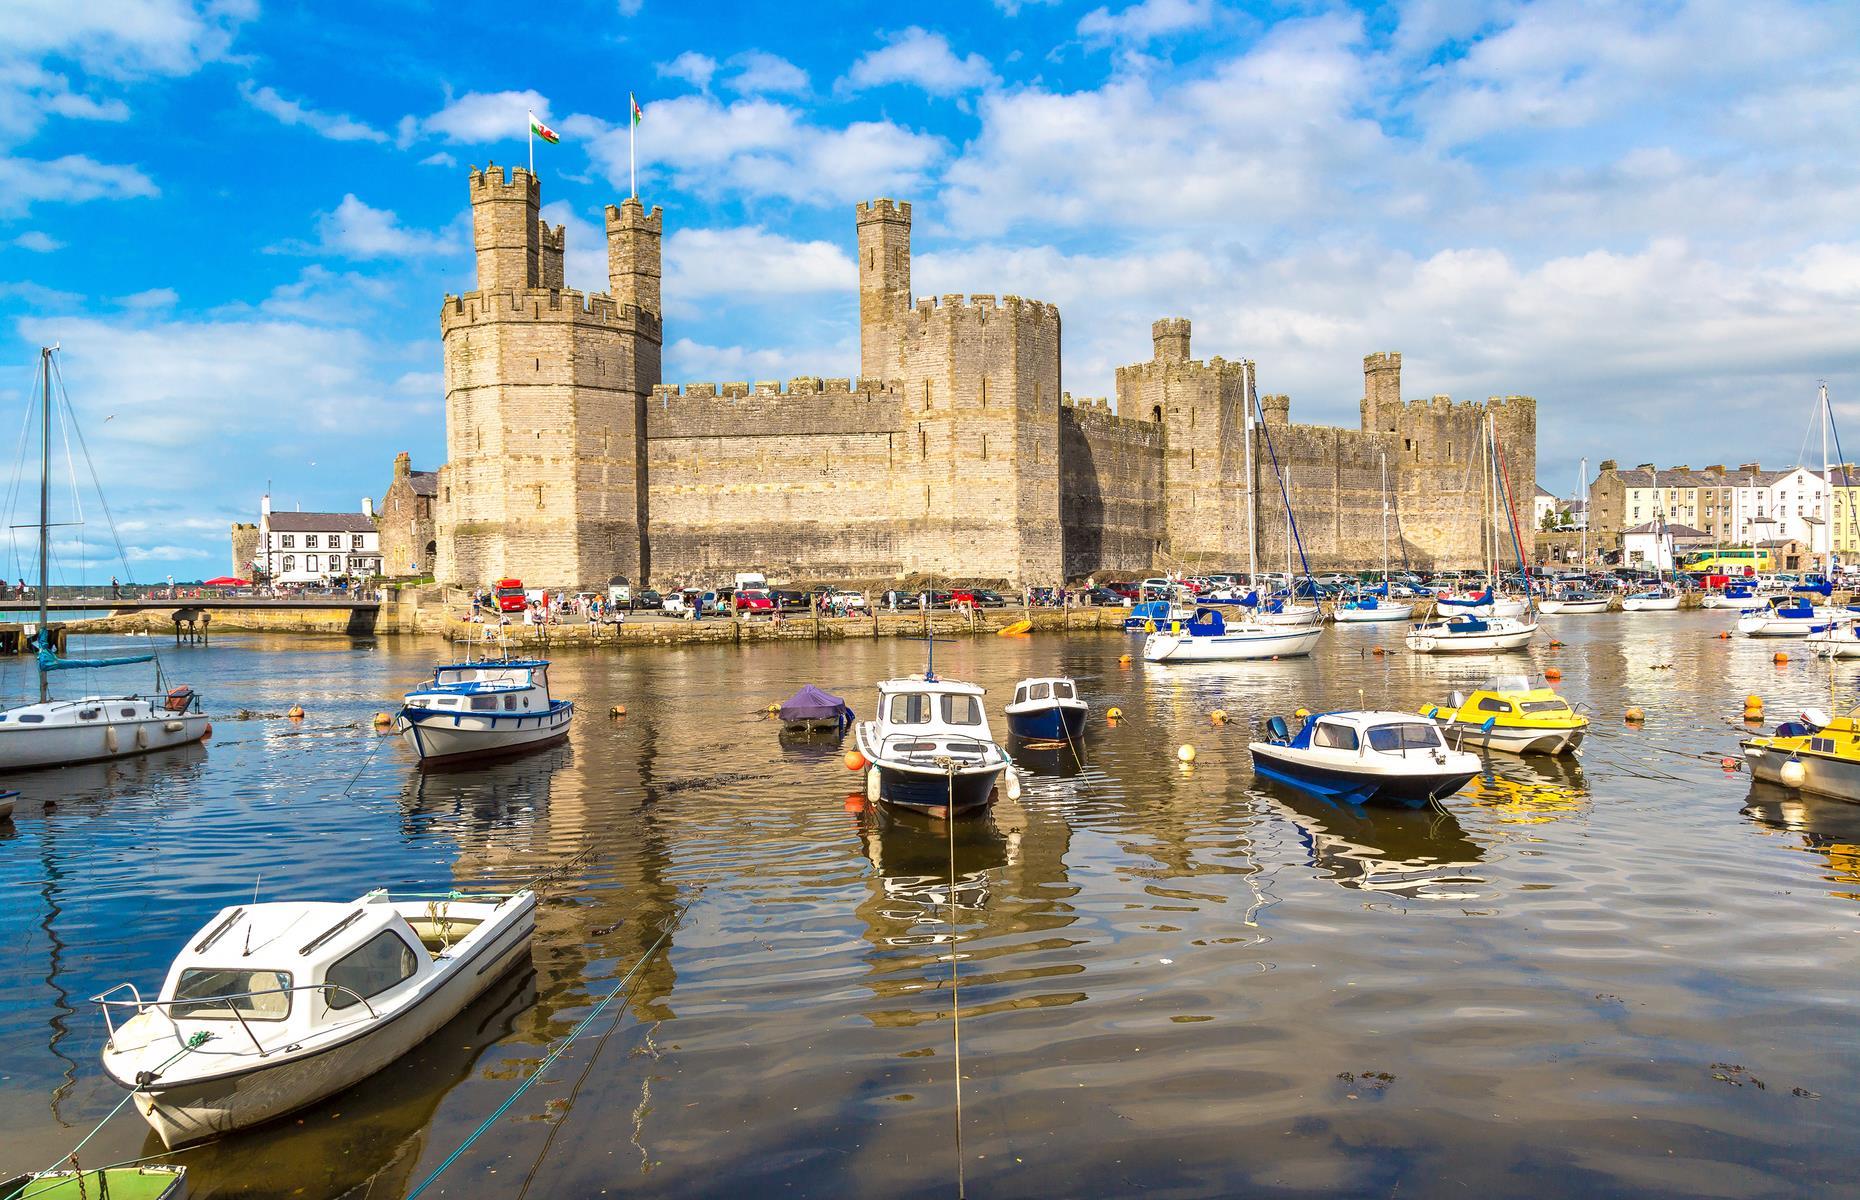 <p>Dating back to the 13th century, this impressive fortress in the royal town of <a href="https://www.loveexploring.com/news/88159/things-to-see-and-do-in-caernarfon-castle-wales">Caernarfon</a> is often hailed as one the most beautiful castles in Wales. Built by Edward I on the Menai Strait, it took a staggering 47 years to complete the castle alongside three other fortresses, Conwy, Beaumaris and Harlech as well as town walls and a quay. Considered the finest surviving examples of 13th-century military architecture in Europe, the castles and walls of Edward I were awarded World Heritage status in 1986.</p>  <p><strong><a href="https://www.loveexploring.com/galleries/64254/30-reasons-to-love-wales?page=1">Discover 30 reasons to love Wales</a></strong></p>